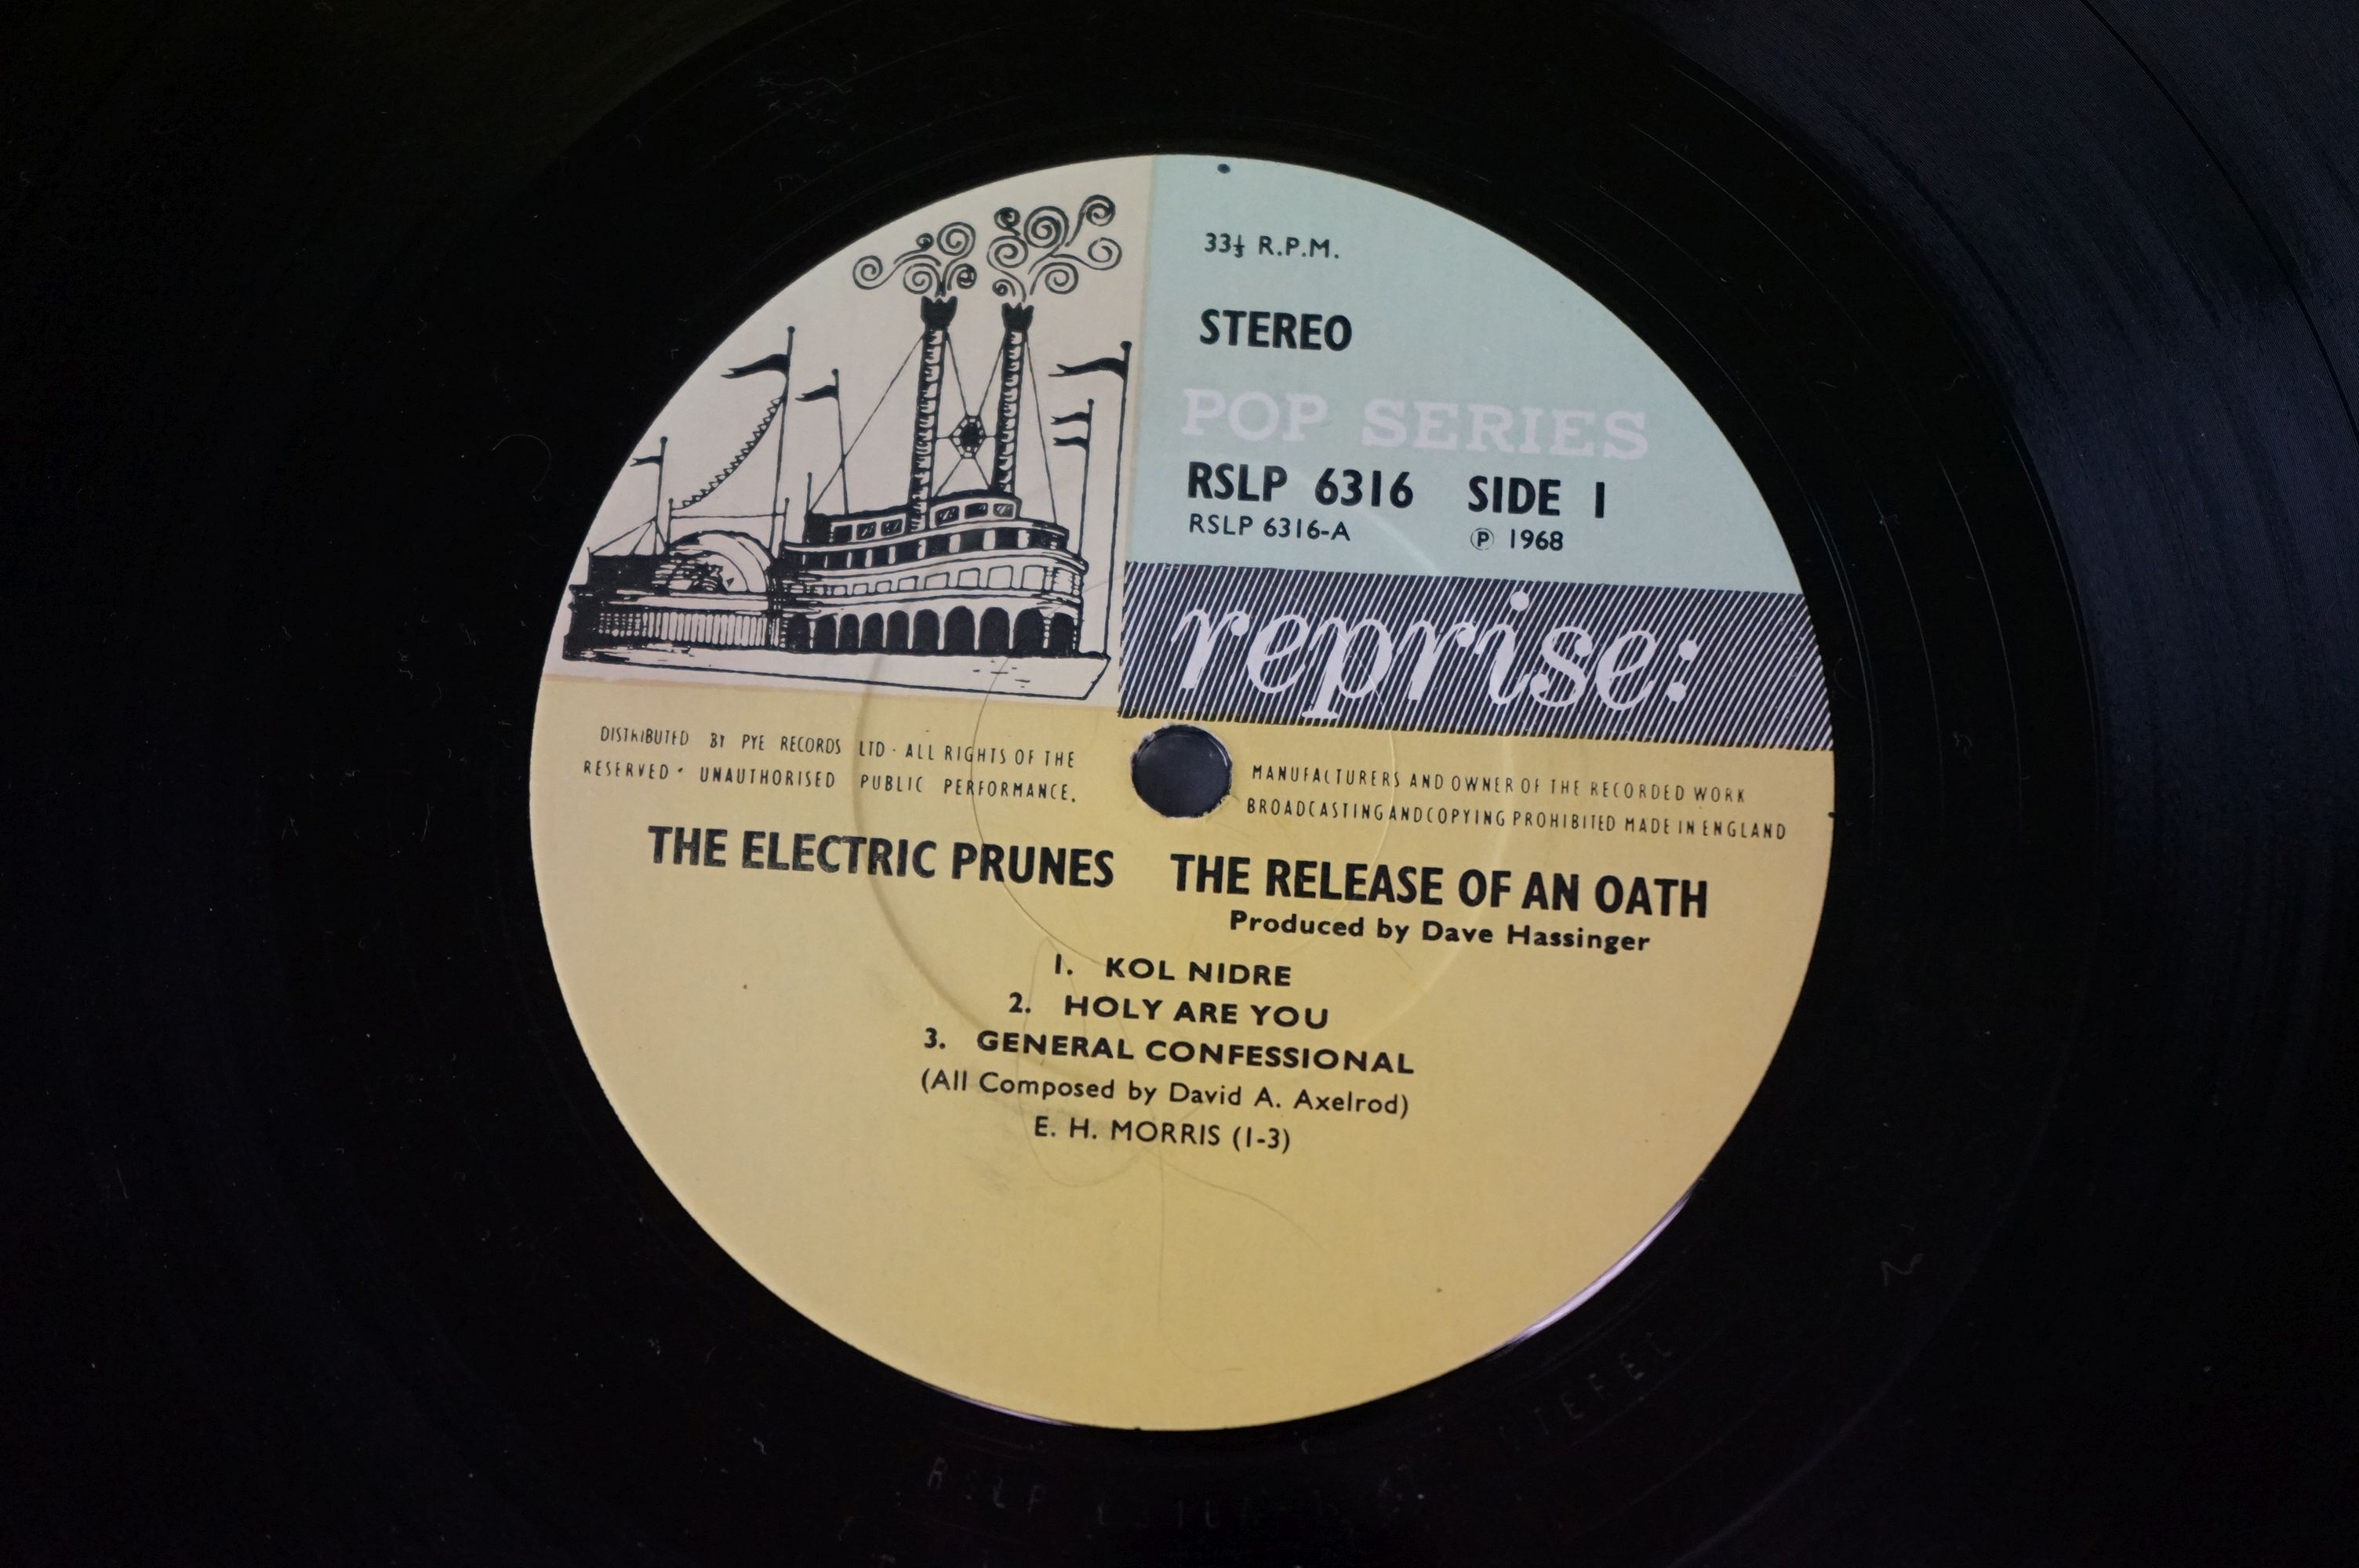 Vinyl - The Electric Prunes - Release Of An Oath on Reprise Records (RSLP 6316) Original UK 1st - Image 3 of 4